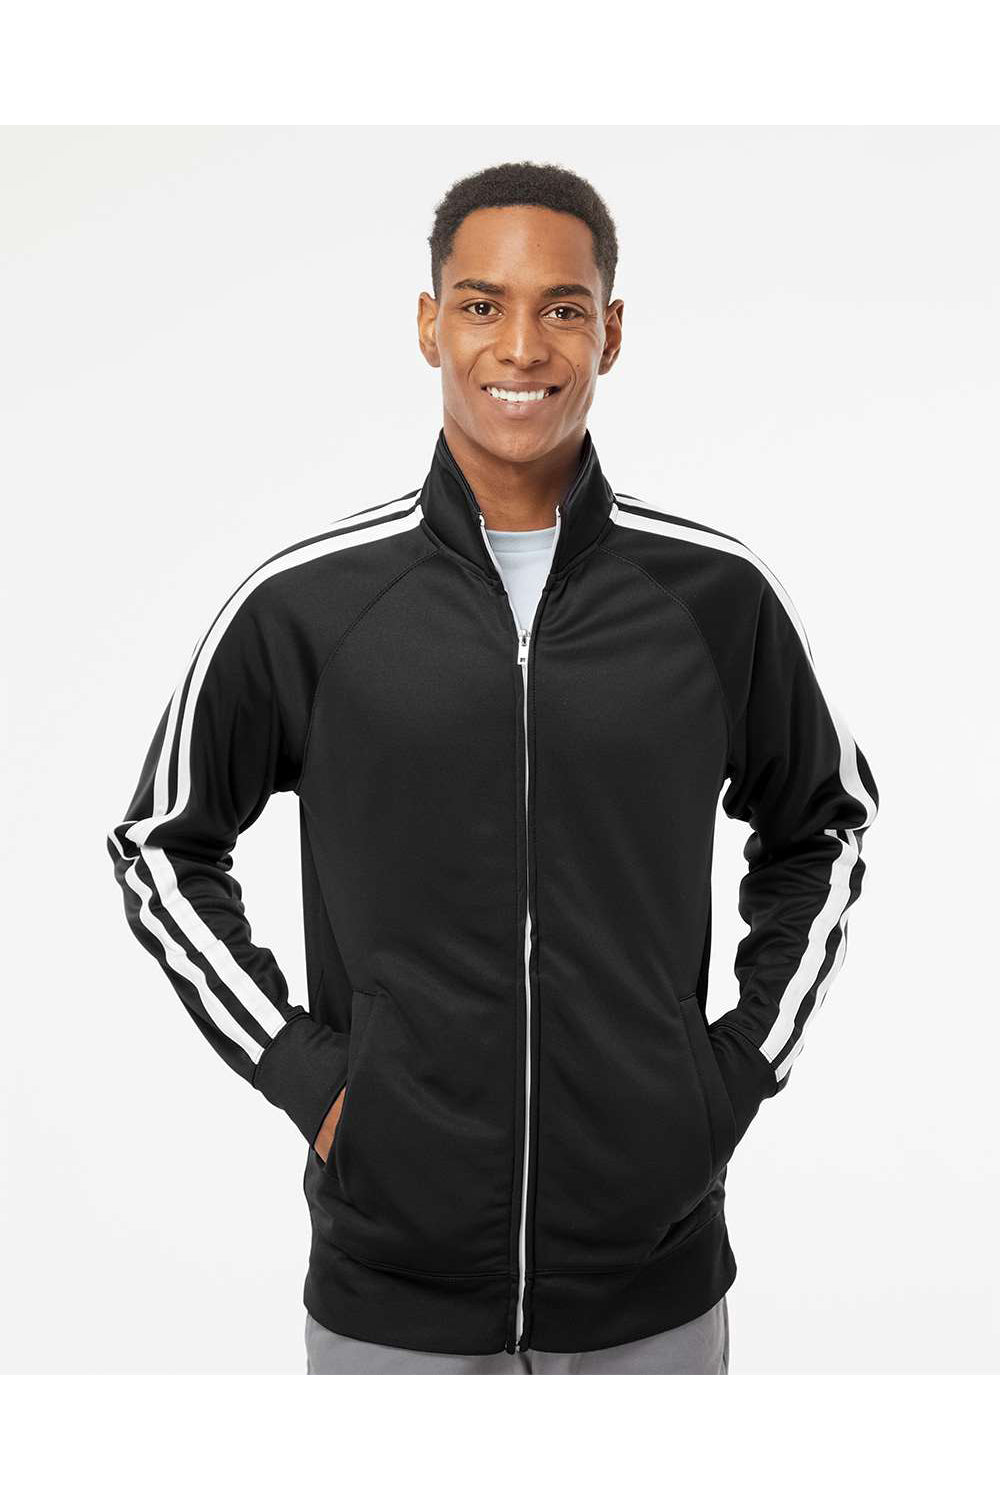 Independent Trading Co. EXP70PTZ Mens Poly Tech Full Zip Track Jacket Black/White Model Front